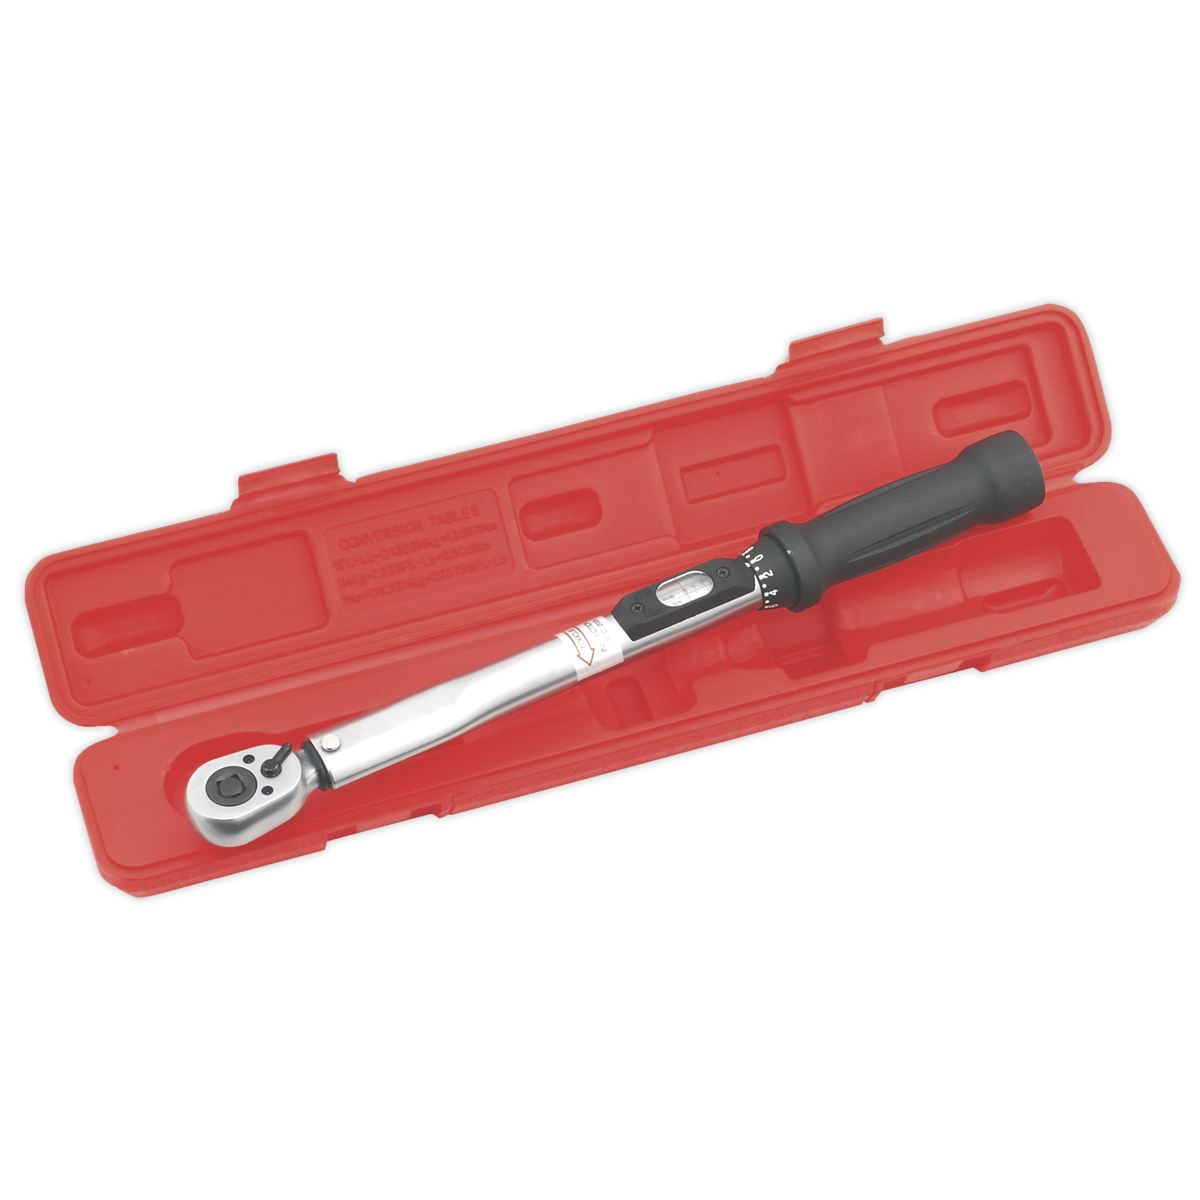 Sealey Premier Torque Wrench Locking Micrometer Style 3/8"Sq Drive10-110Nm(10-80lb.ft) Calibrated